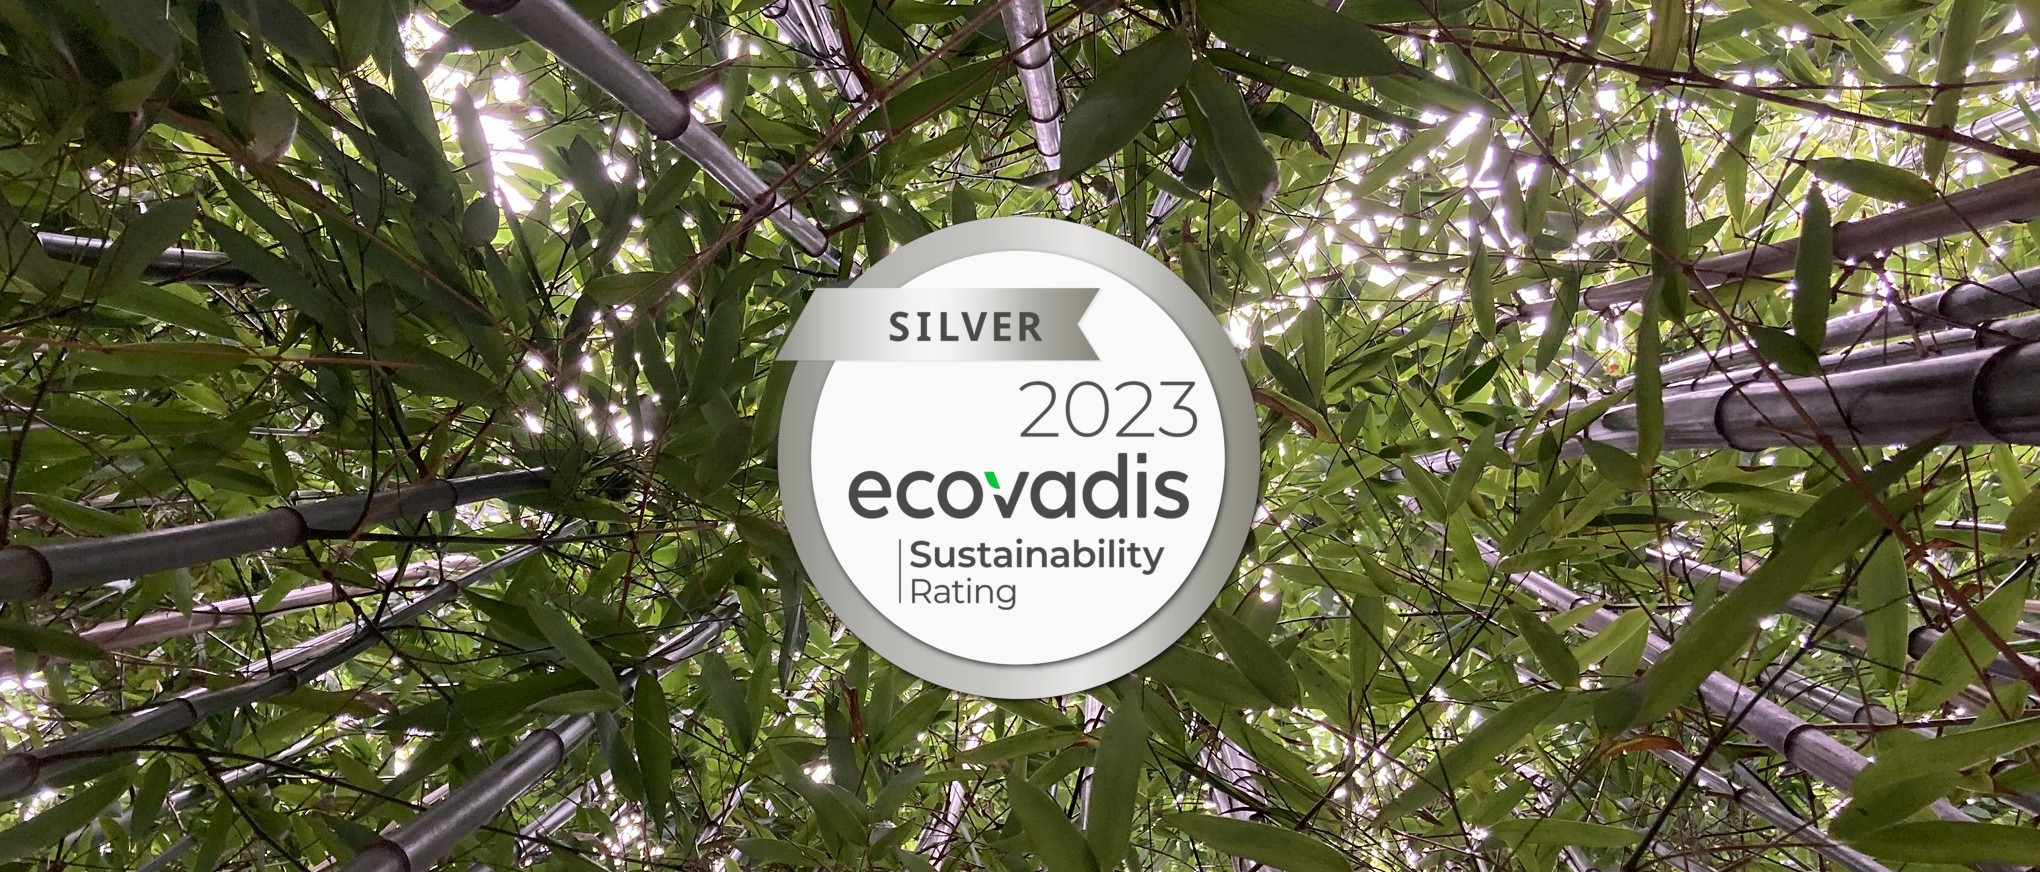 TW Solar Factory Awarded Silver Ecovadis Rating